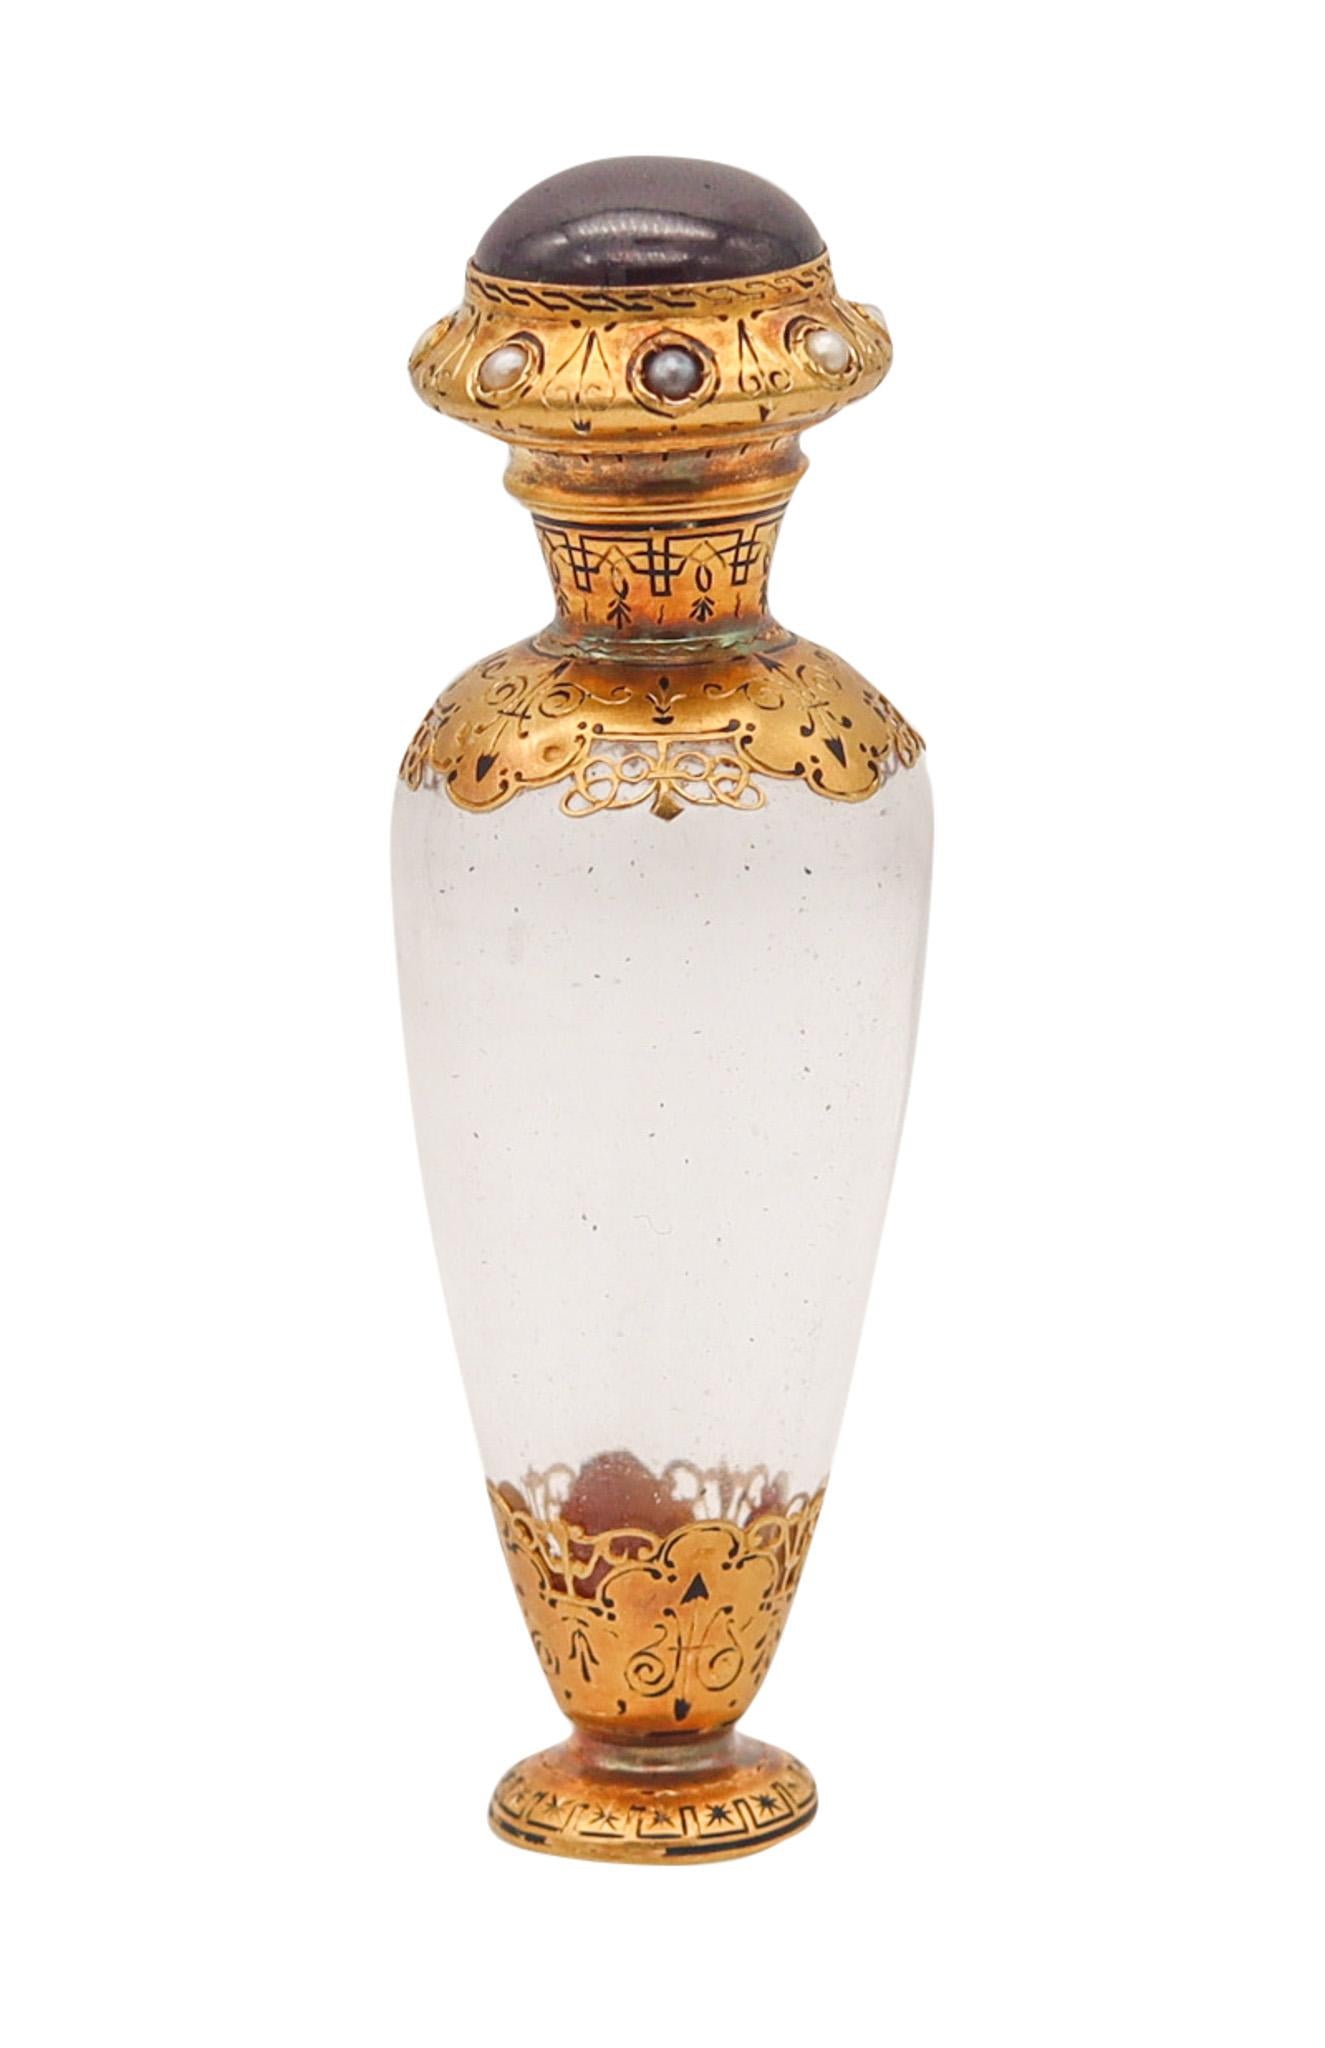 French 1870 Napoleon III Perfume Bottle Mount In 18Kt Yellow Gold With Gemstones For Sale